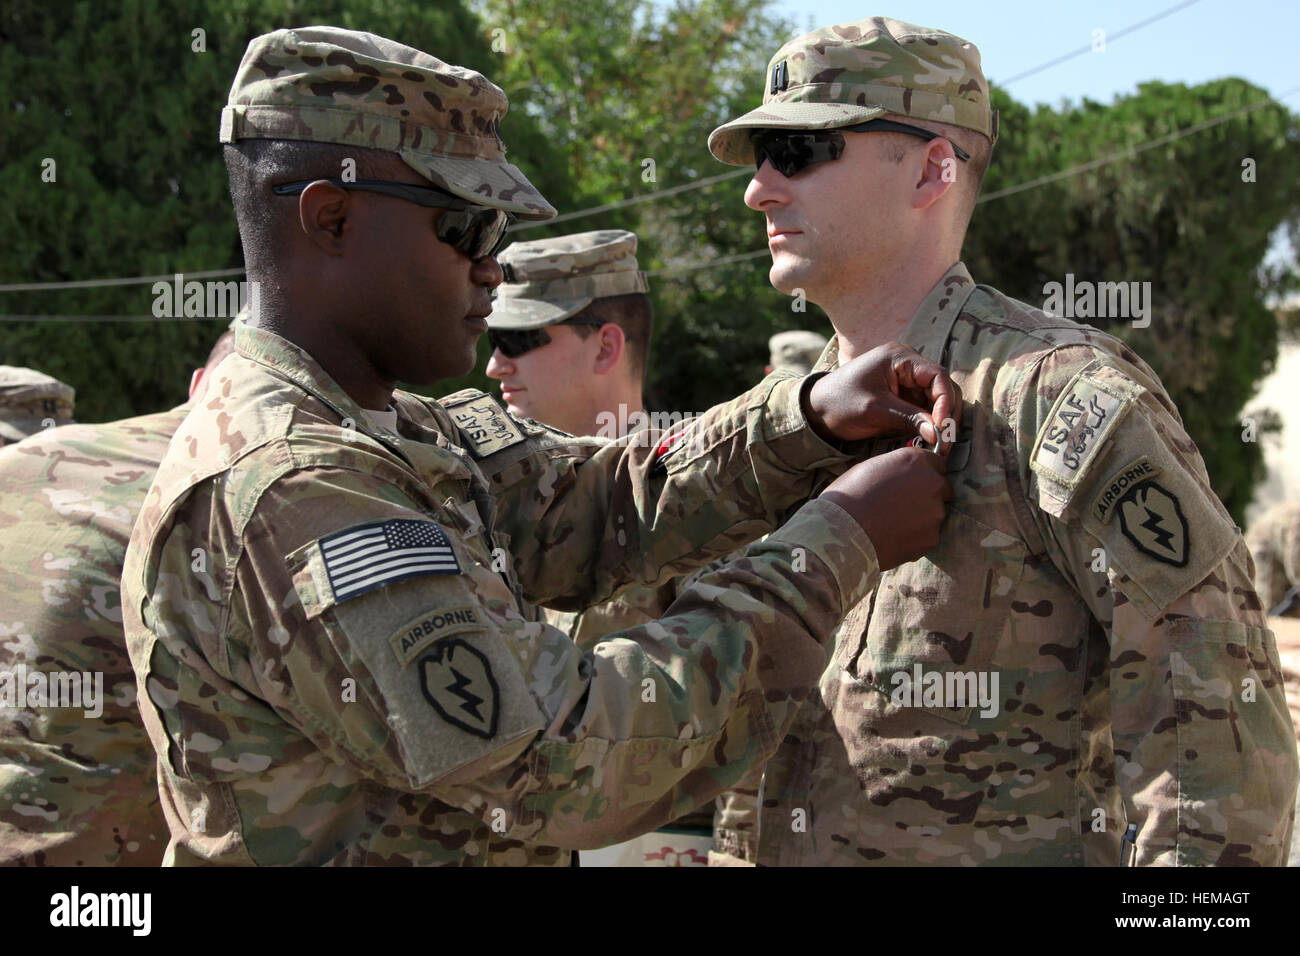 U.S. Army Capt. Gibbs with 425th Brigade Special Troops Battalion (Airborne), Task Force 4-25, is awarded the Bronze Star Medal by U.S. Army Lt. Col. Frank Smith, battalion commander for 425th Brigade Special Troops Battalion (Airborne), on Forward Operating Base Salerno, Khost province, Afghanistan, Sept. 29, 2012. Award ceremony 120929-A-PO167-045 Stock Photo